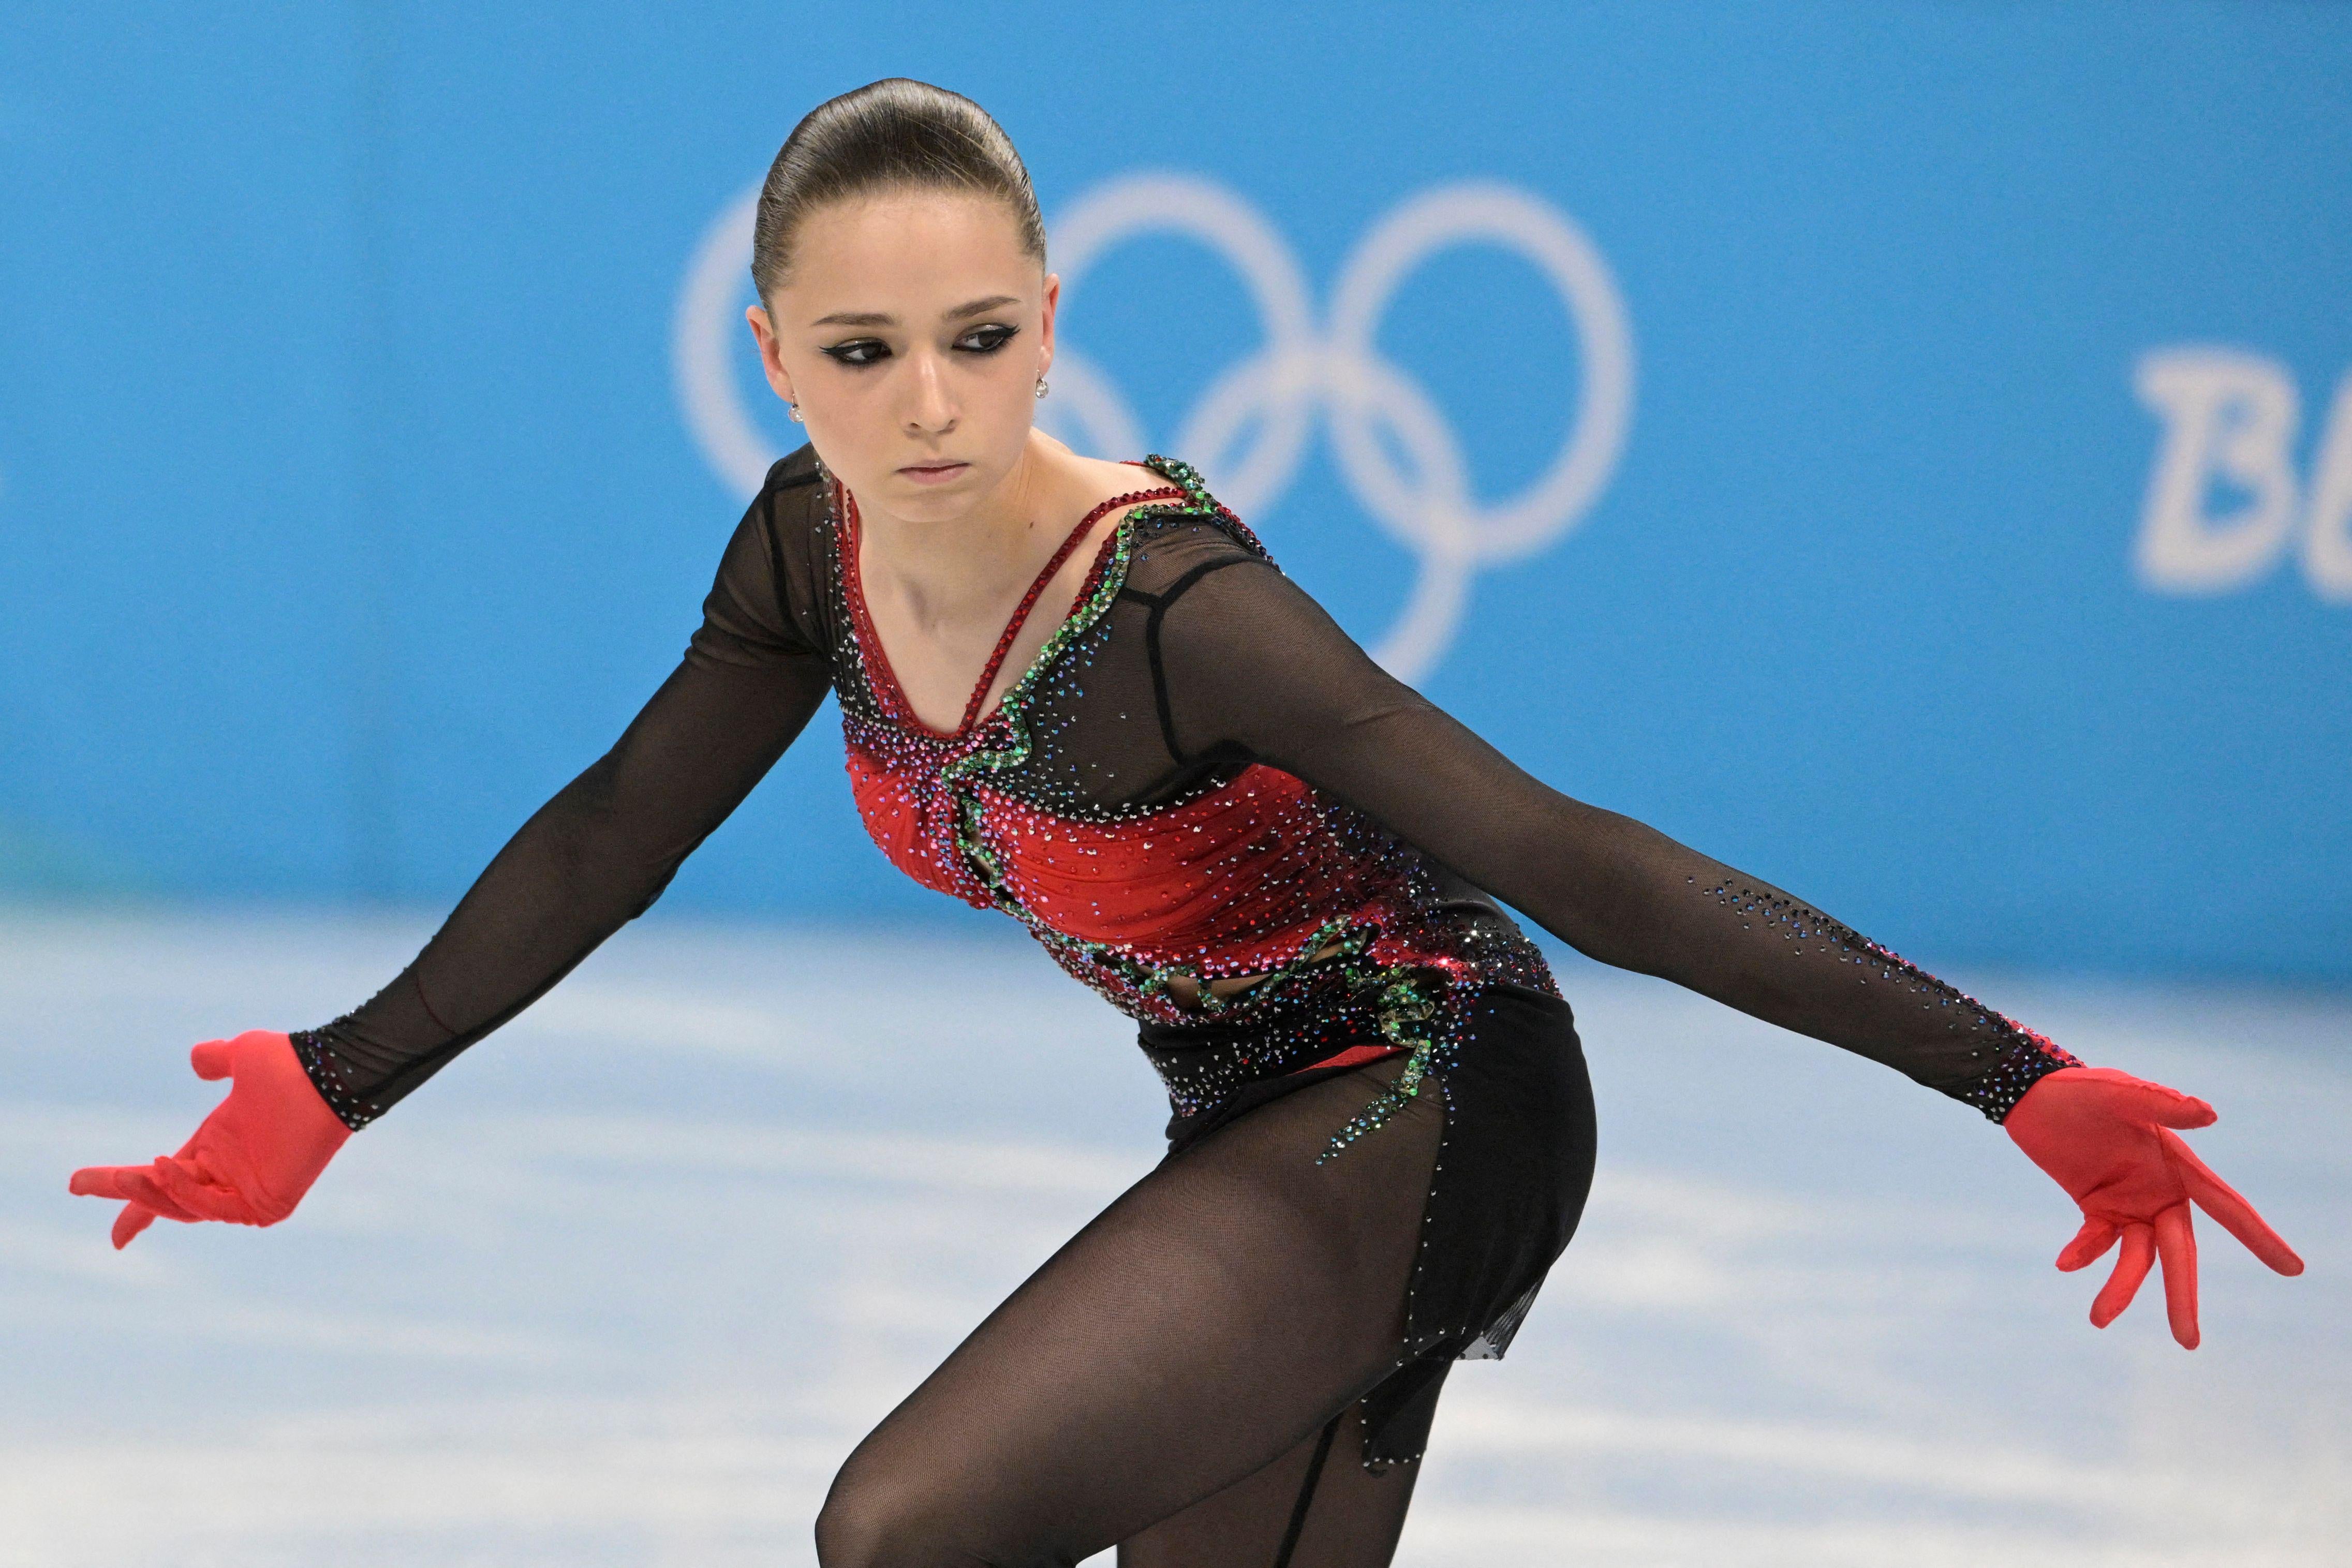 Valieva turning on the ice, stony-faced with her arms extended outward and gloved palms up